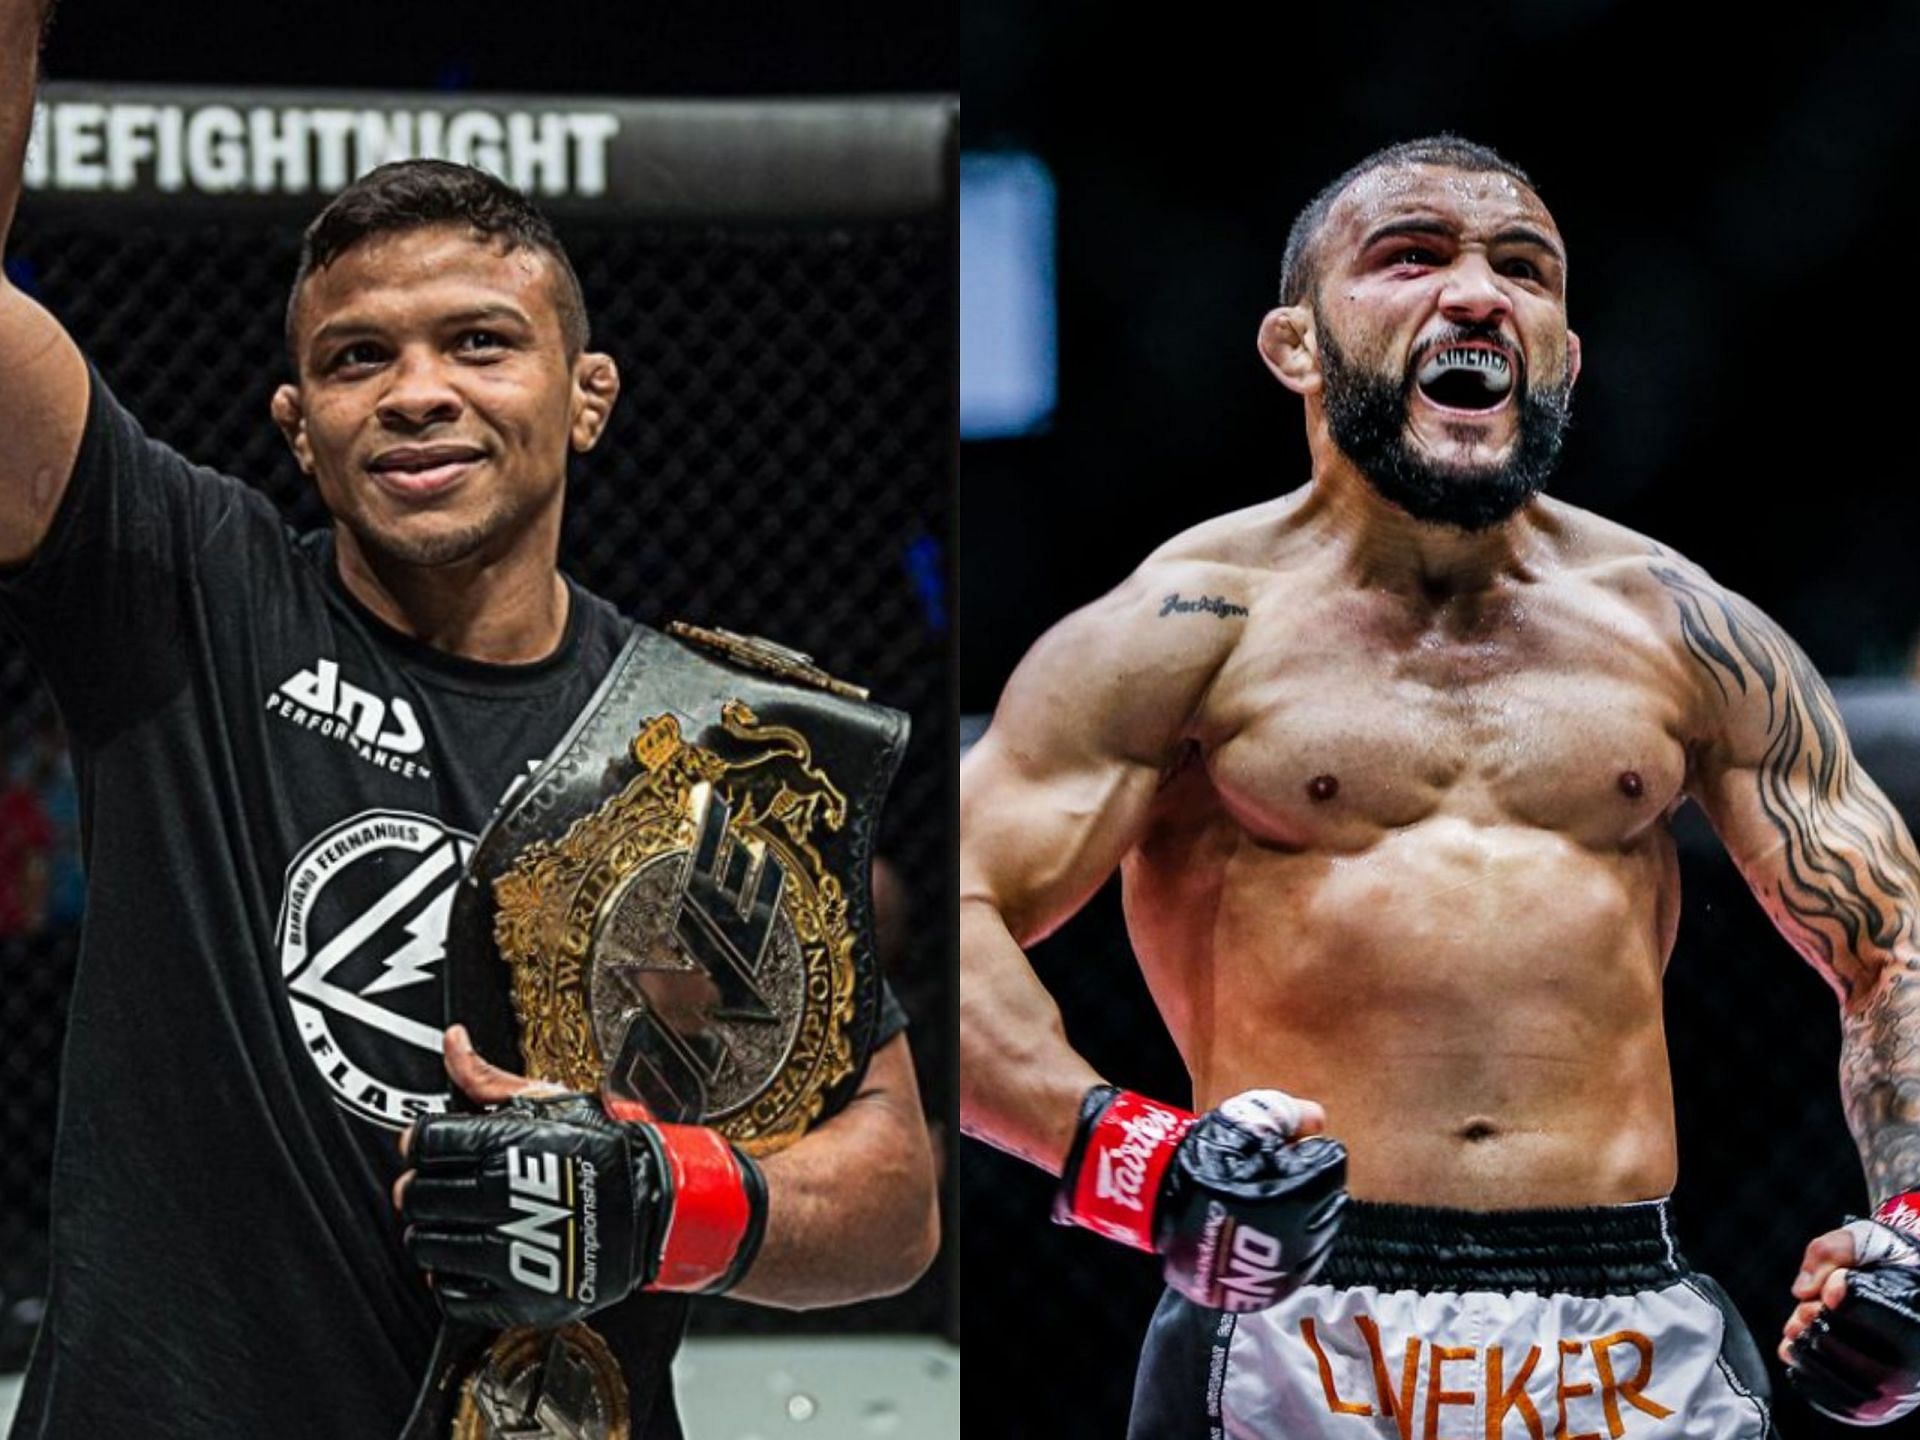 Bibiano Fernandes (left) vs. John Lineker (right) was scheduled as the main event of ONE: Bad Blood. [Photos: ONE Championship]